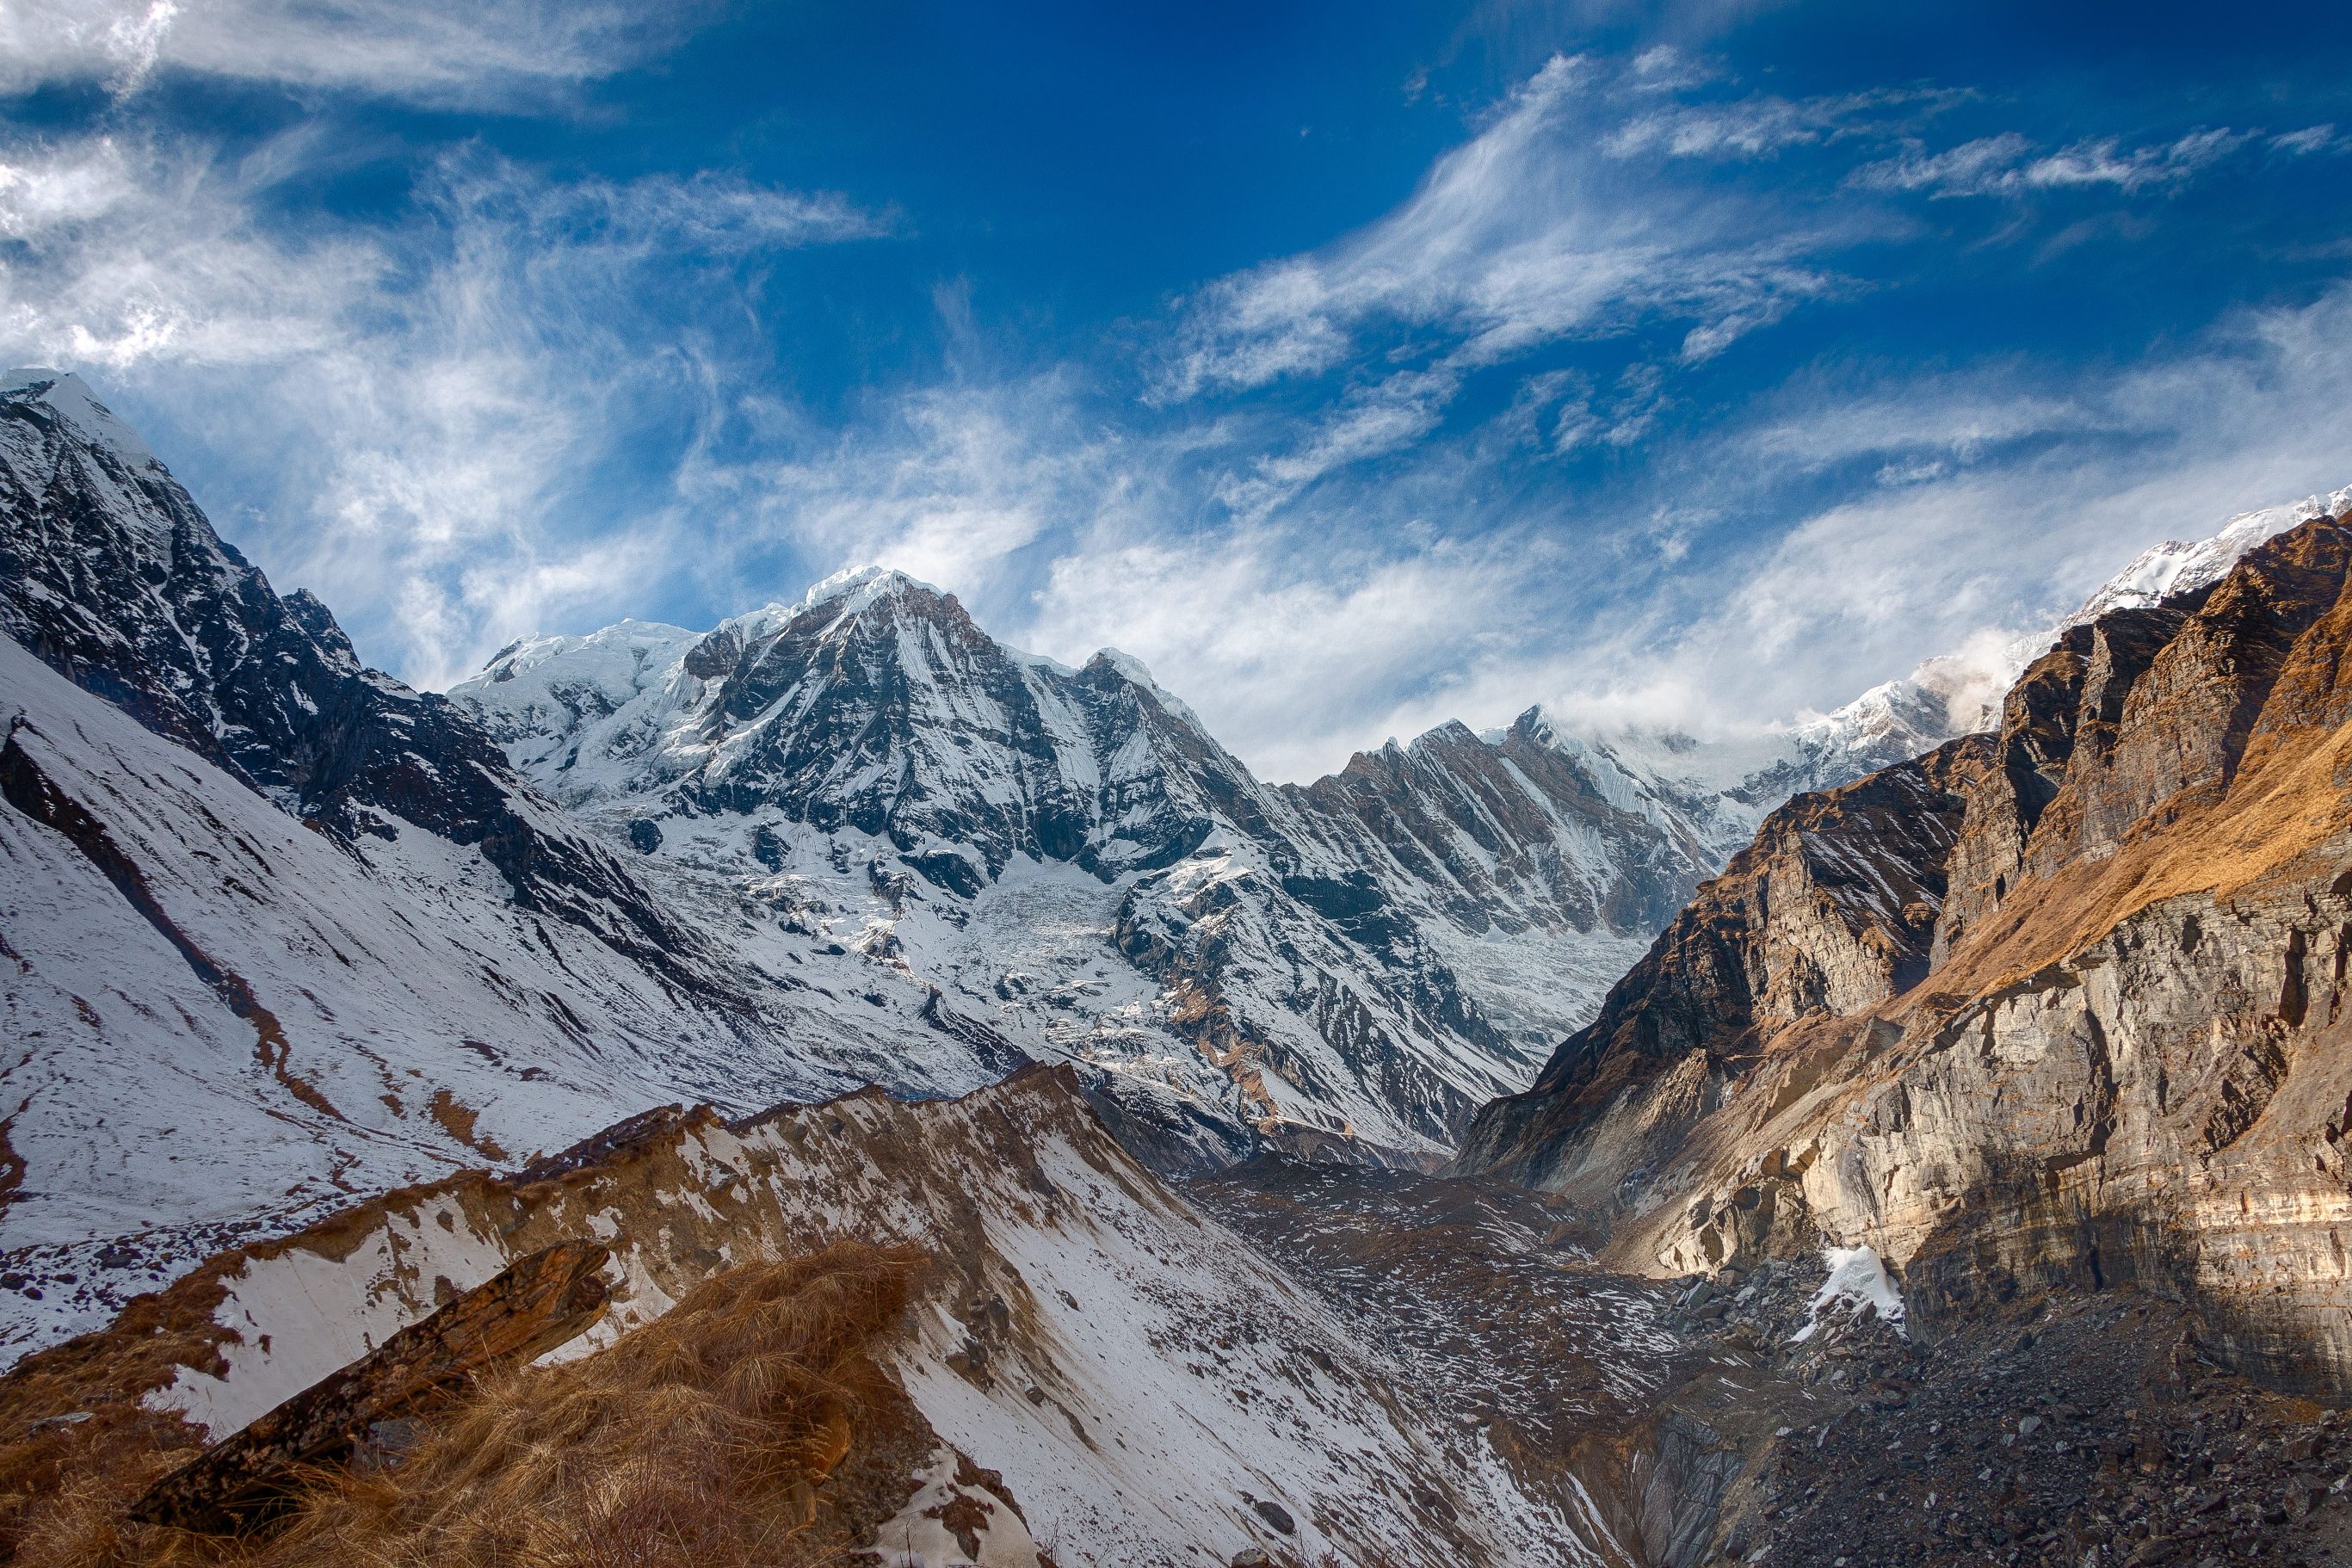 The remarkable Annapurna mountains, home to the Annapurna Circuit and Sanctuary Trail